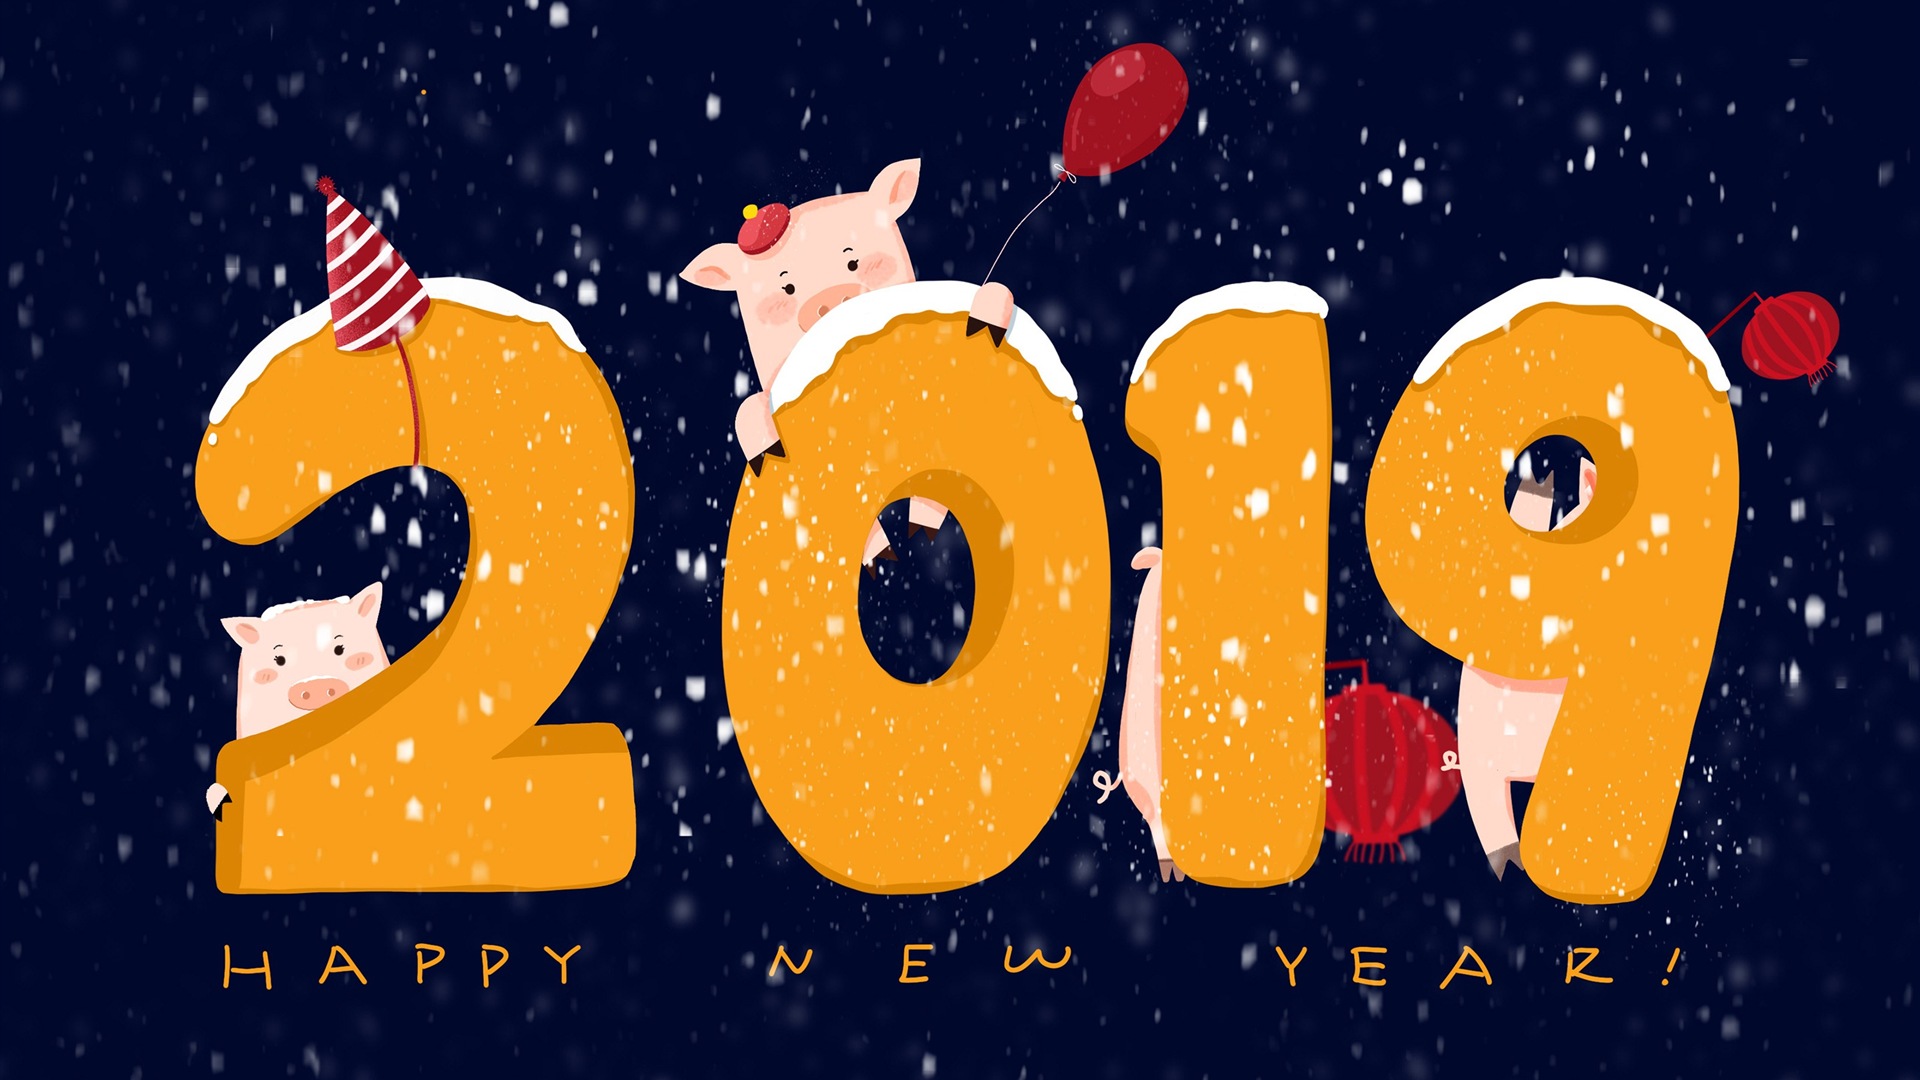 Happy New Year 2019 HD wallpapers #18 - 1920x1080